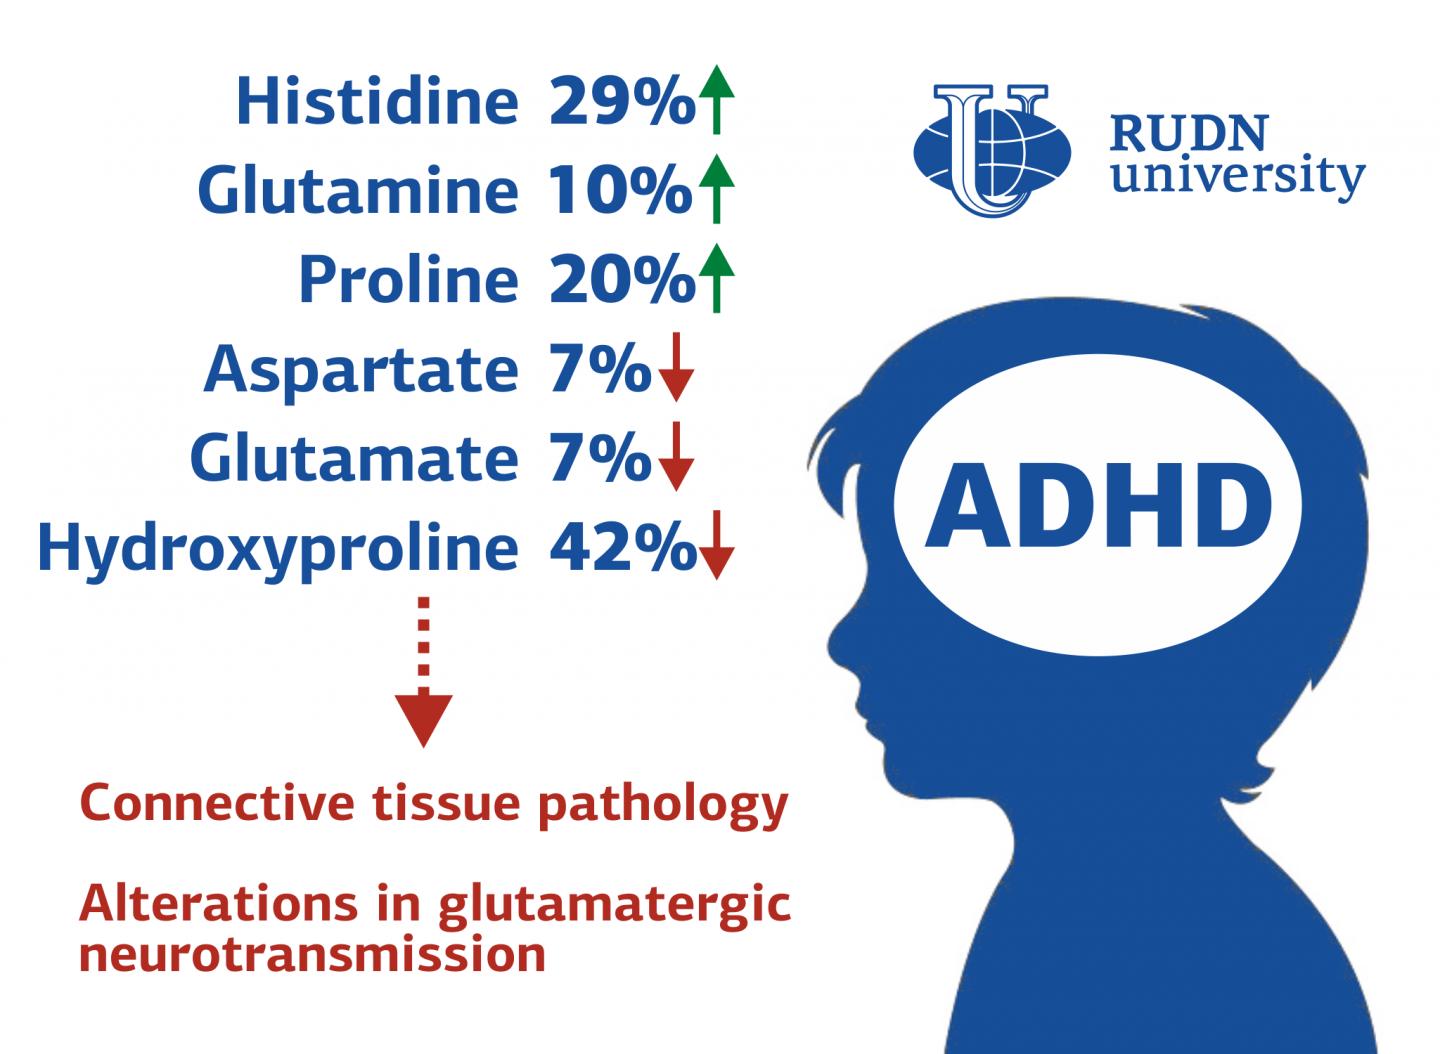 RUDN University Medics Detect Alterations in Amino Acid Profiles in Children with ADHD